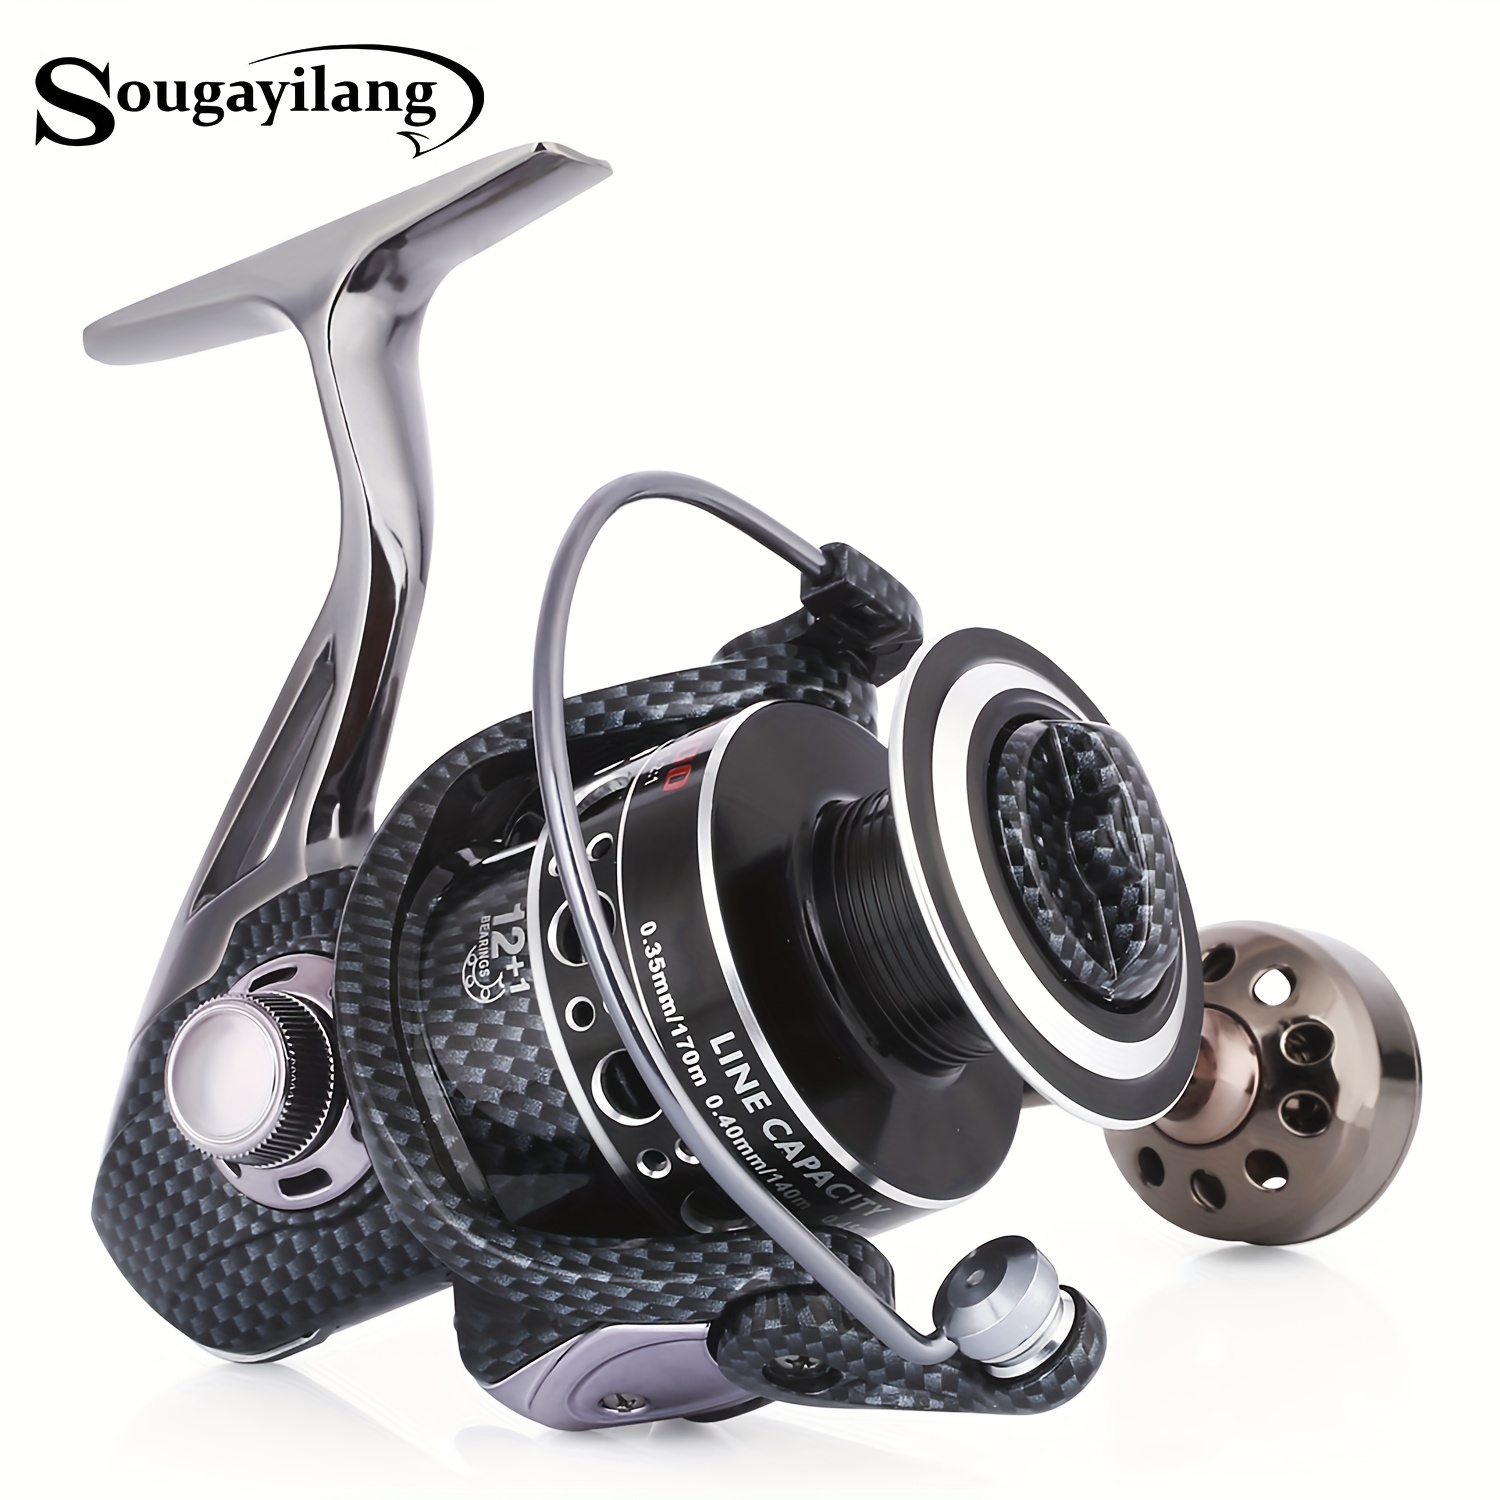 Sougayilang Spinning Fishing Reel - Interchangeable Handle, Powerful Metal  Body, Smooth 12+1 BB, Ideal For Inshore, Boat, Rock, Freshwater And Saltwat